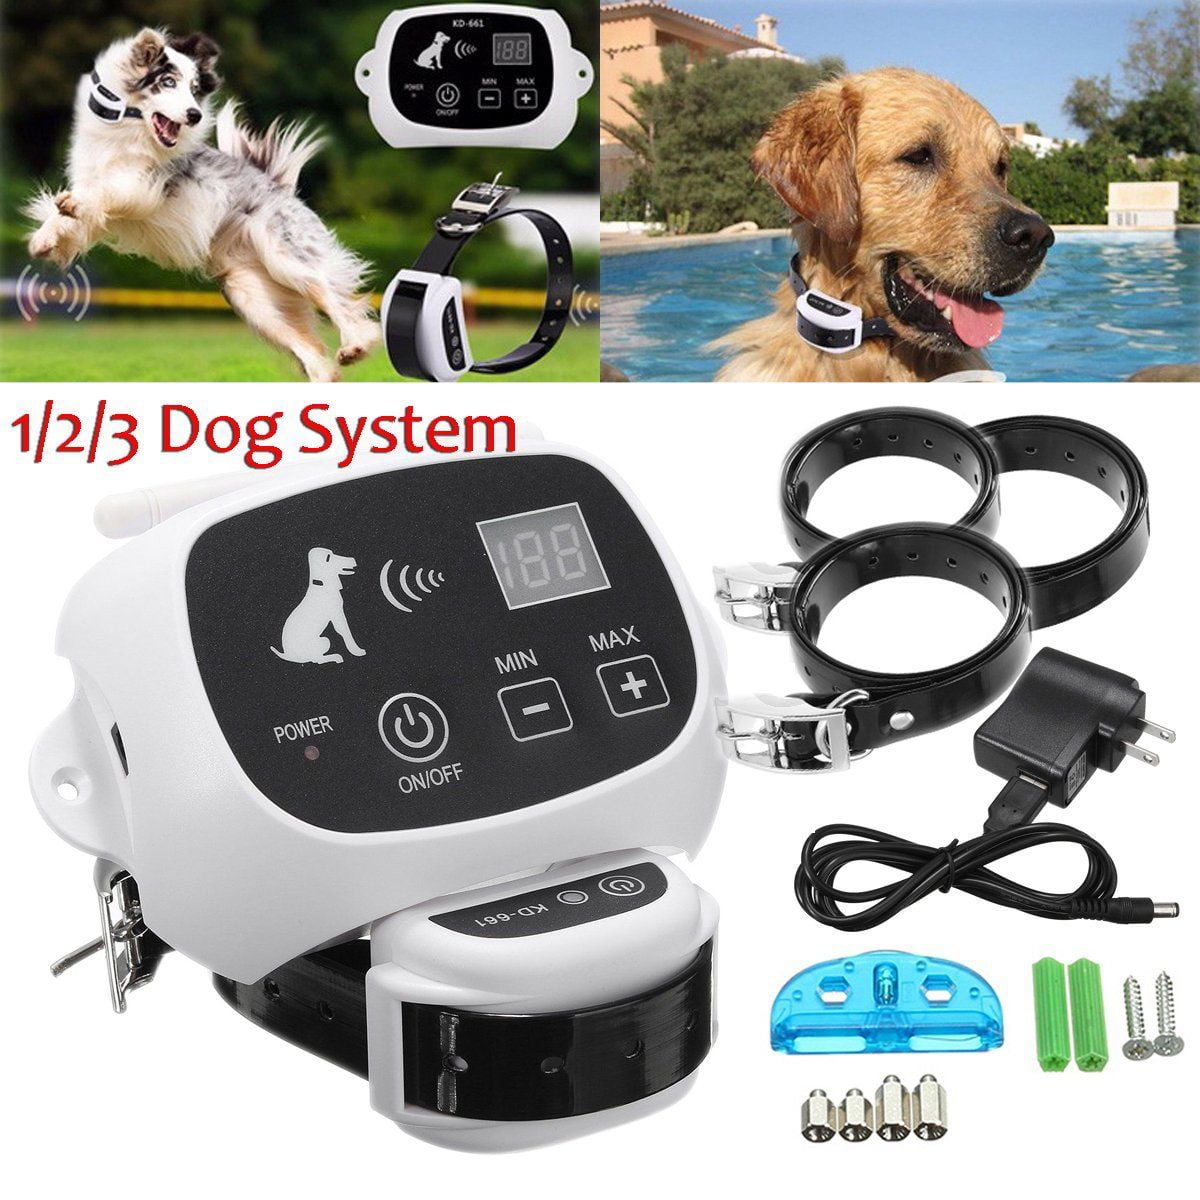 For 2 Dogs Electric Dog Fence Inground Wireless Dog Fencing System Rechargeable & Waterproof Dog